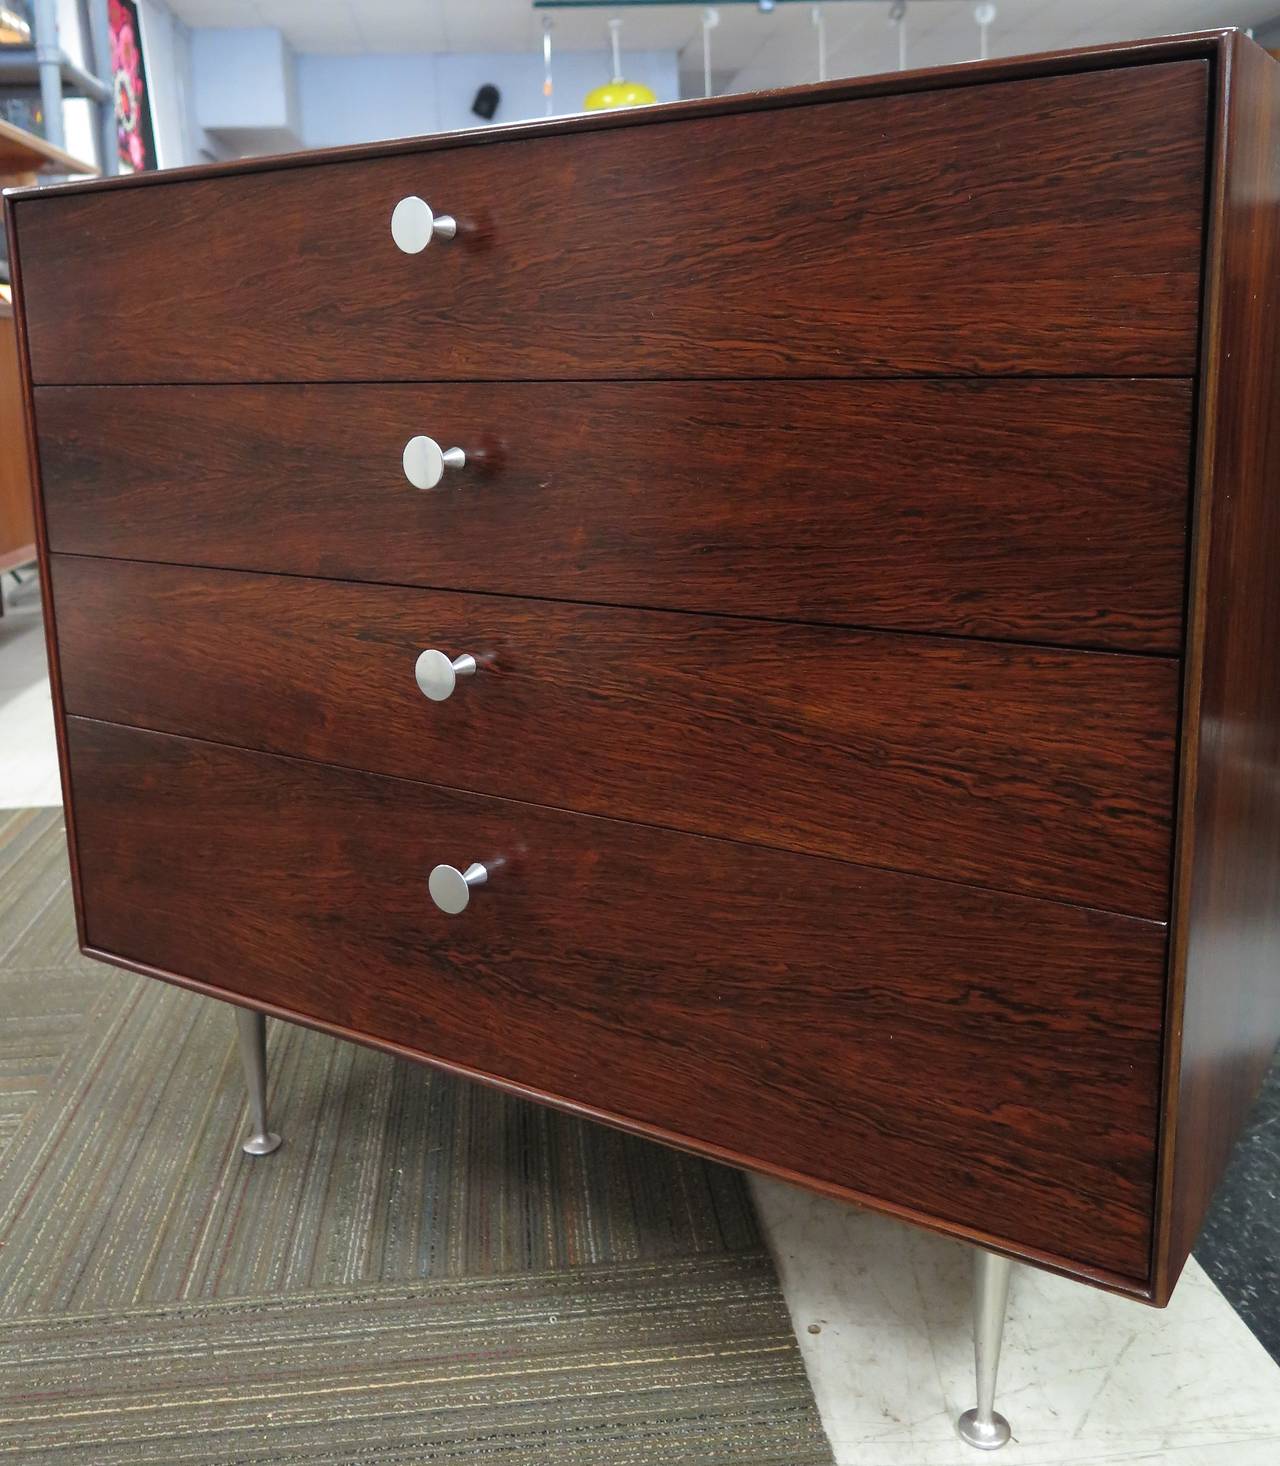 Label. Restored. Rosewood construction with aluminum pulls and legs. Excellent condition. Top drawer has removable dividers.